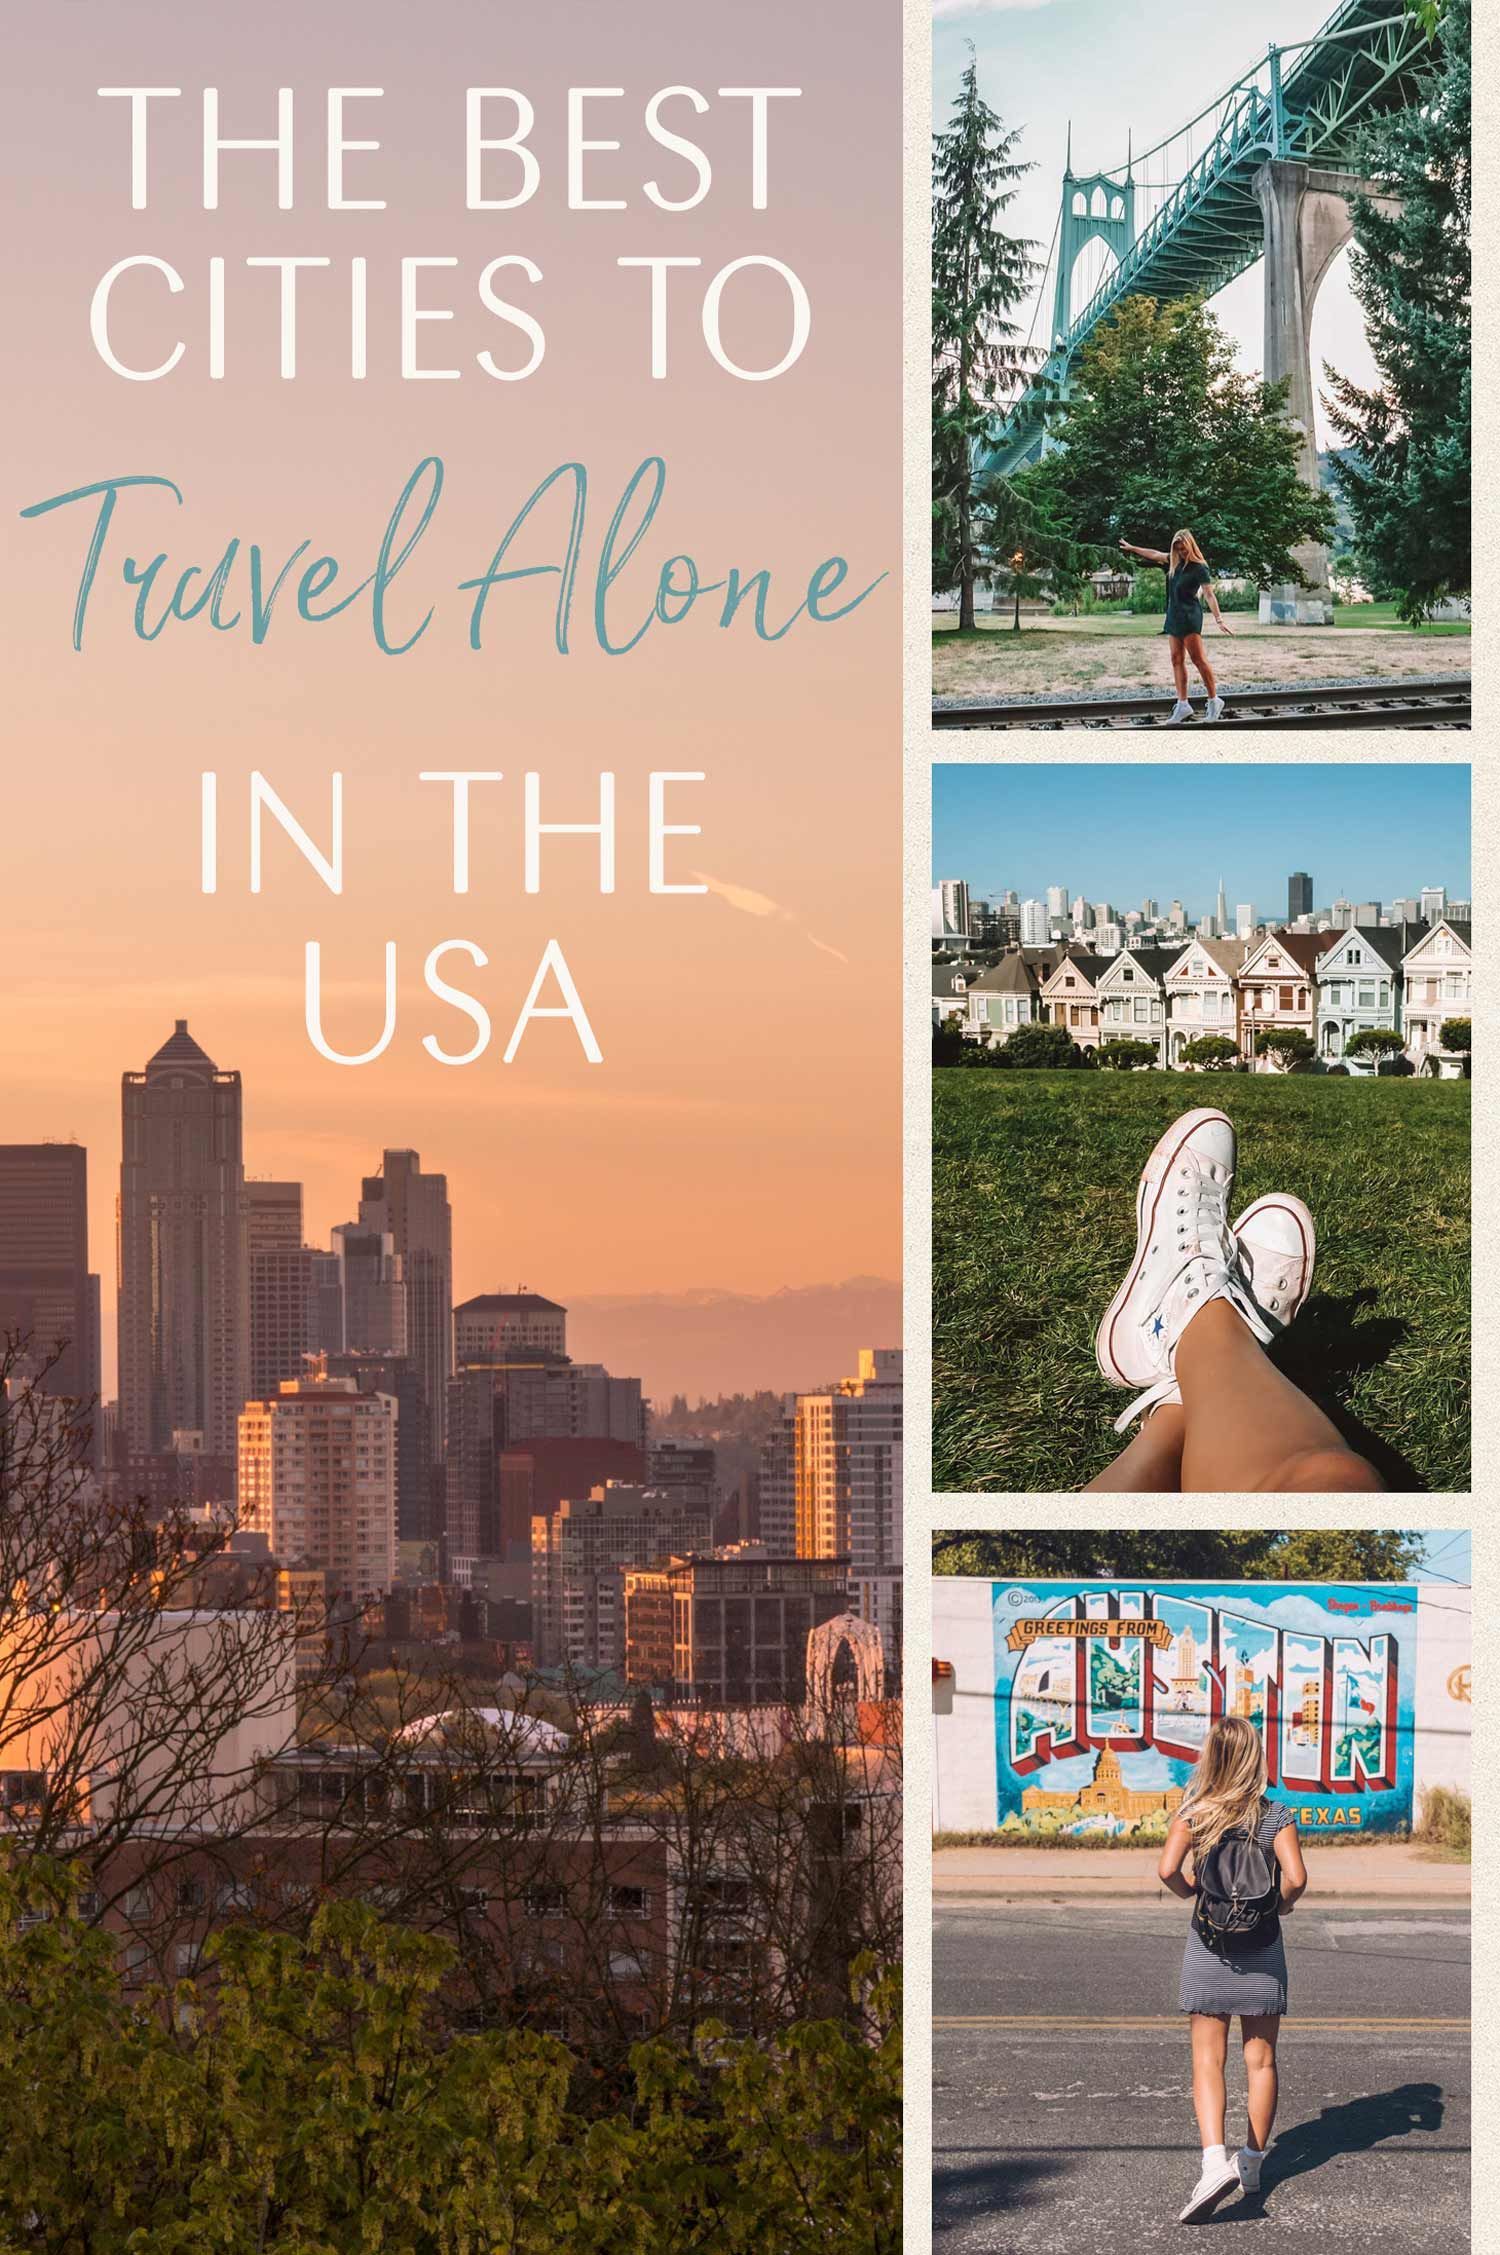 The Best Cities to Travel Alone in the USA • The Blonde Abroad -   17 travel destinations Solo female ideas